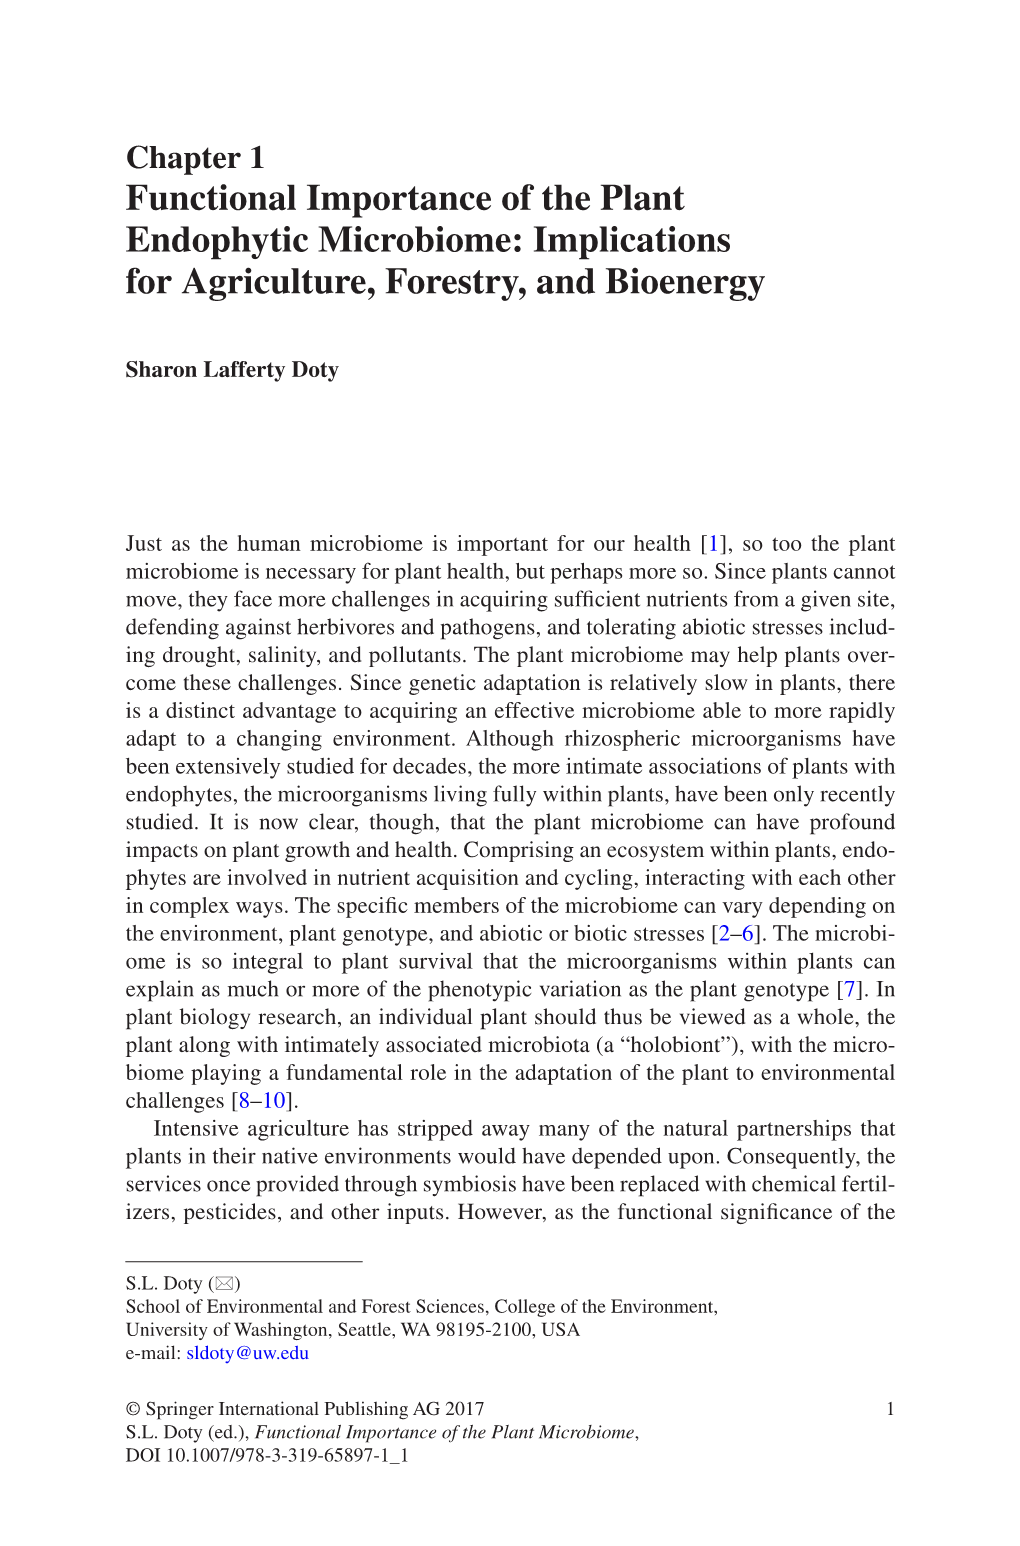 Chapter 1 Functional Importance of the Plant Endophytic Microbiome: Implications for Agriculture, Forestry, and Bioenergy